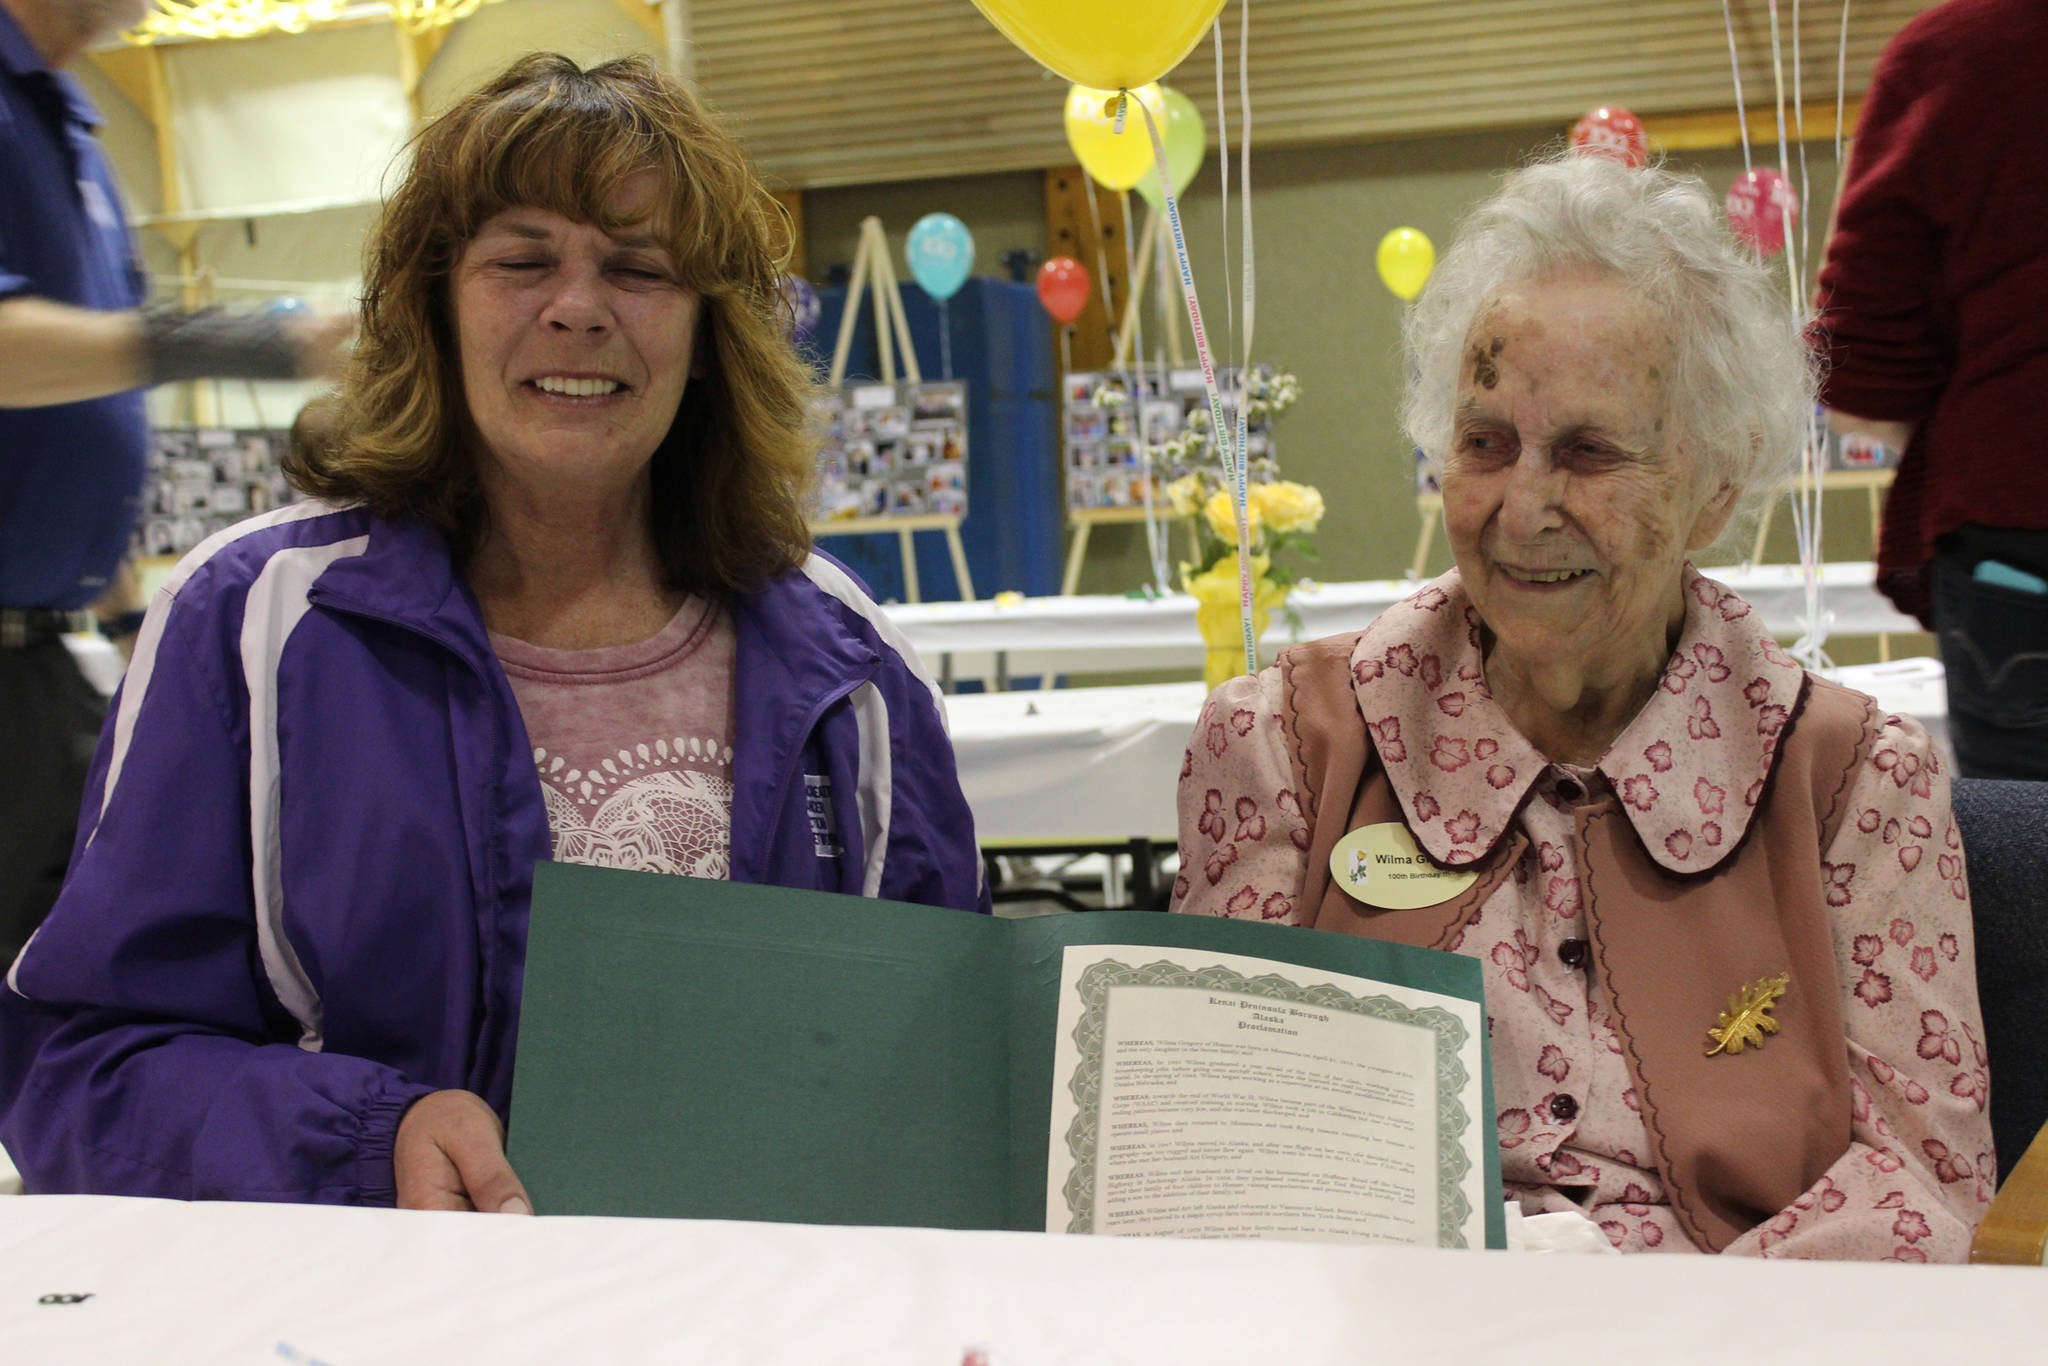 Kenai Peninsula Borough Assembly President Kelly Cooper, left, of Homer presents Wilma Gregory, right, of Homer with a borough proclamation naming Saturday Wilma Gregory Day in honor of Gregory’s 100th birthday. Friends and family celebrated with Gregory at a birthday party held at McNeil Canyon Elementary School. (Photo by McKibben Jackinsky)